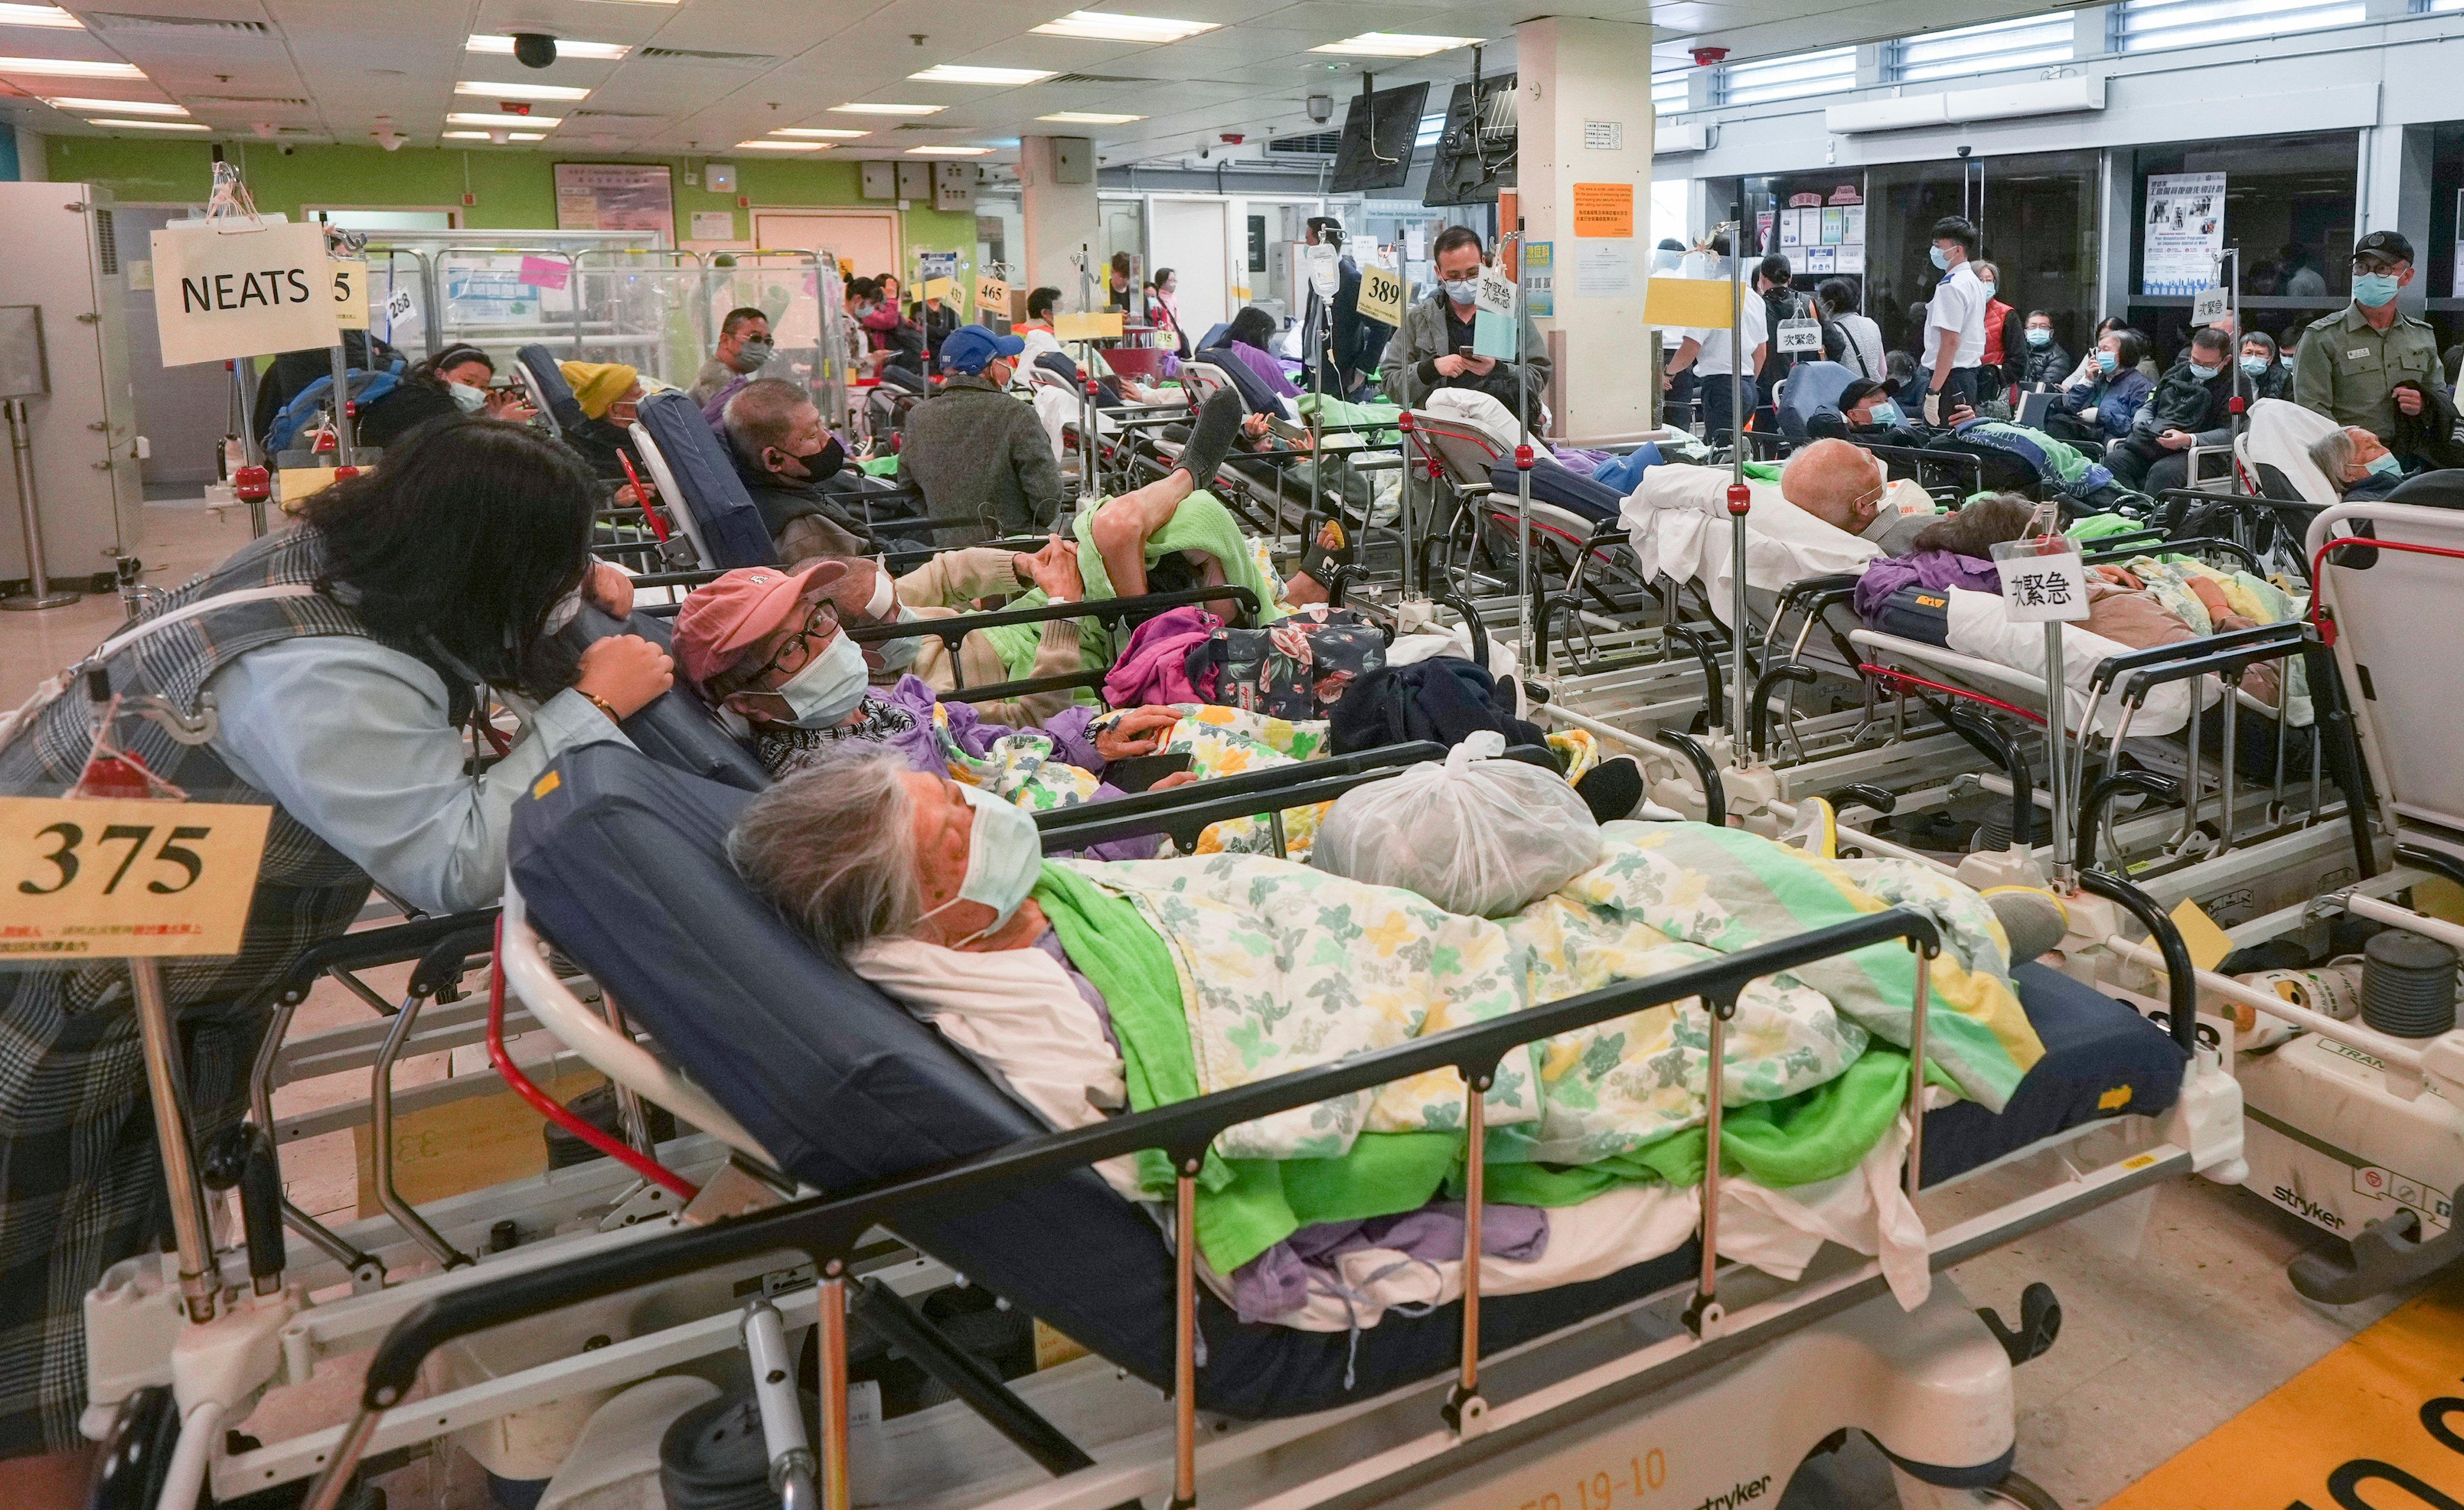 Patients wait for treatment at the A&E department of Queen Elizabeth Hospital in Hong Kong’s Jordan district on January 9. A rise in flu cases in the city has increased pressure on public hospitals, leading city leaders to explore increasing costs for people who go to A&E departments for non-emergency treatment. Photo: Eugene Lee